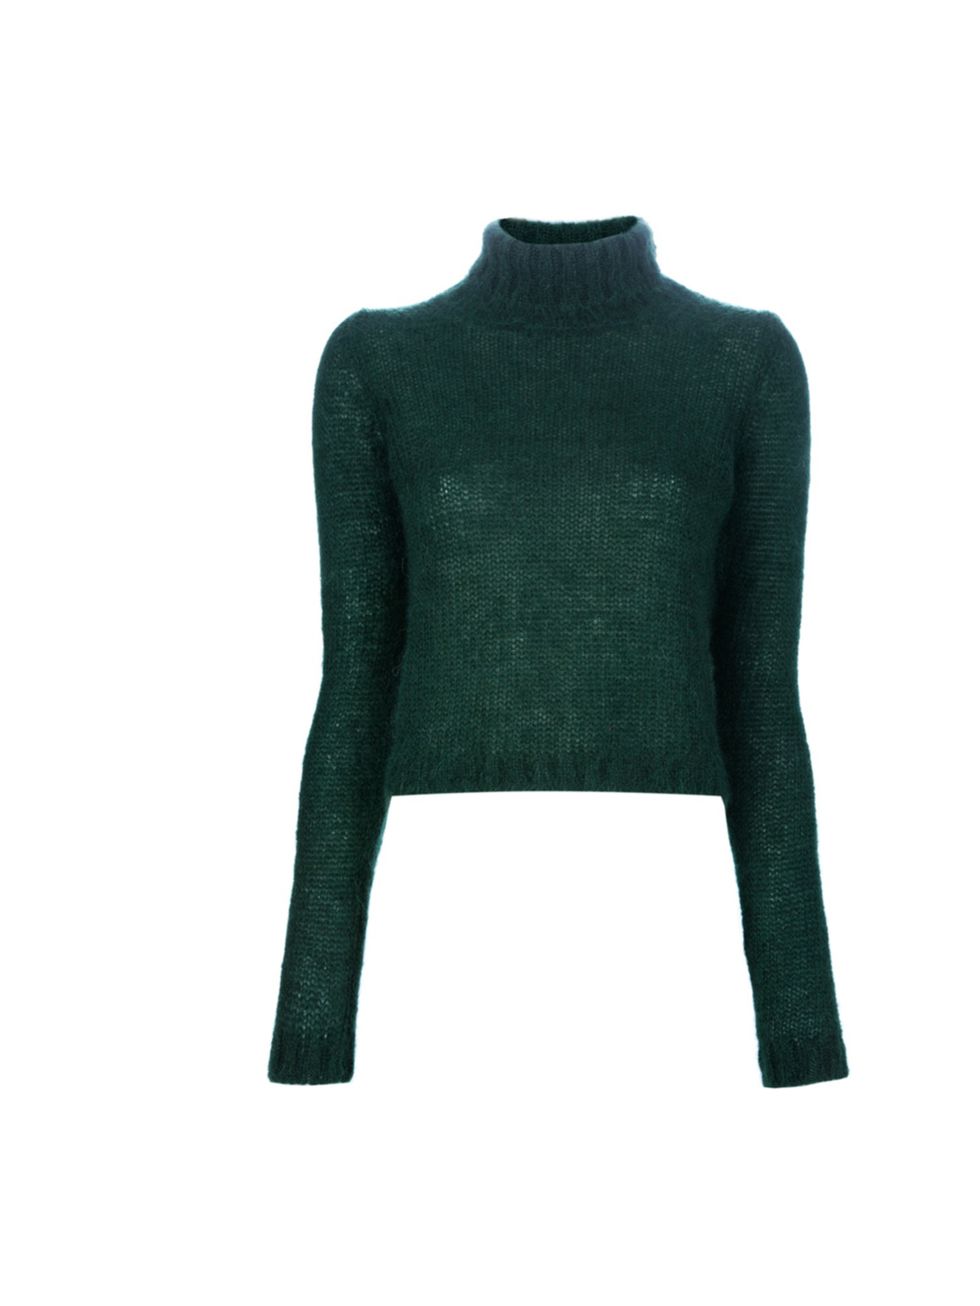 <p>Dondup cropped mohair polo neck jumper, £168.76, at Farfetch</p><p><a href="http://shopping.elleuk.com/browse?fts=dondup+polo+neck">BUY NOW</a></p>